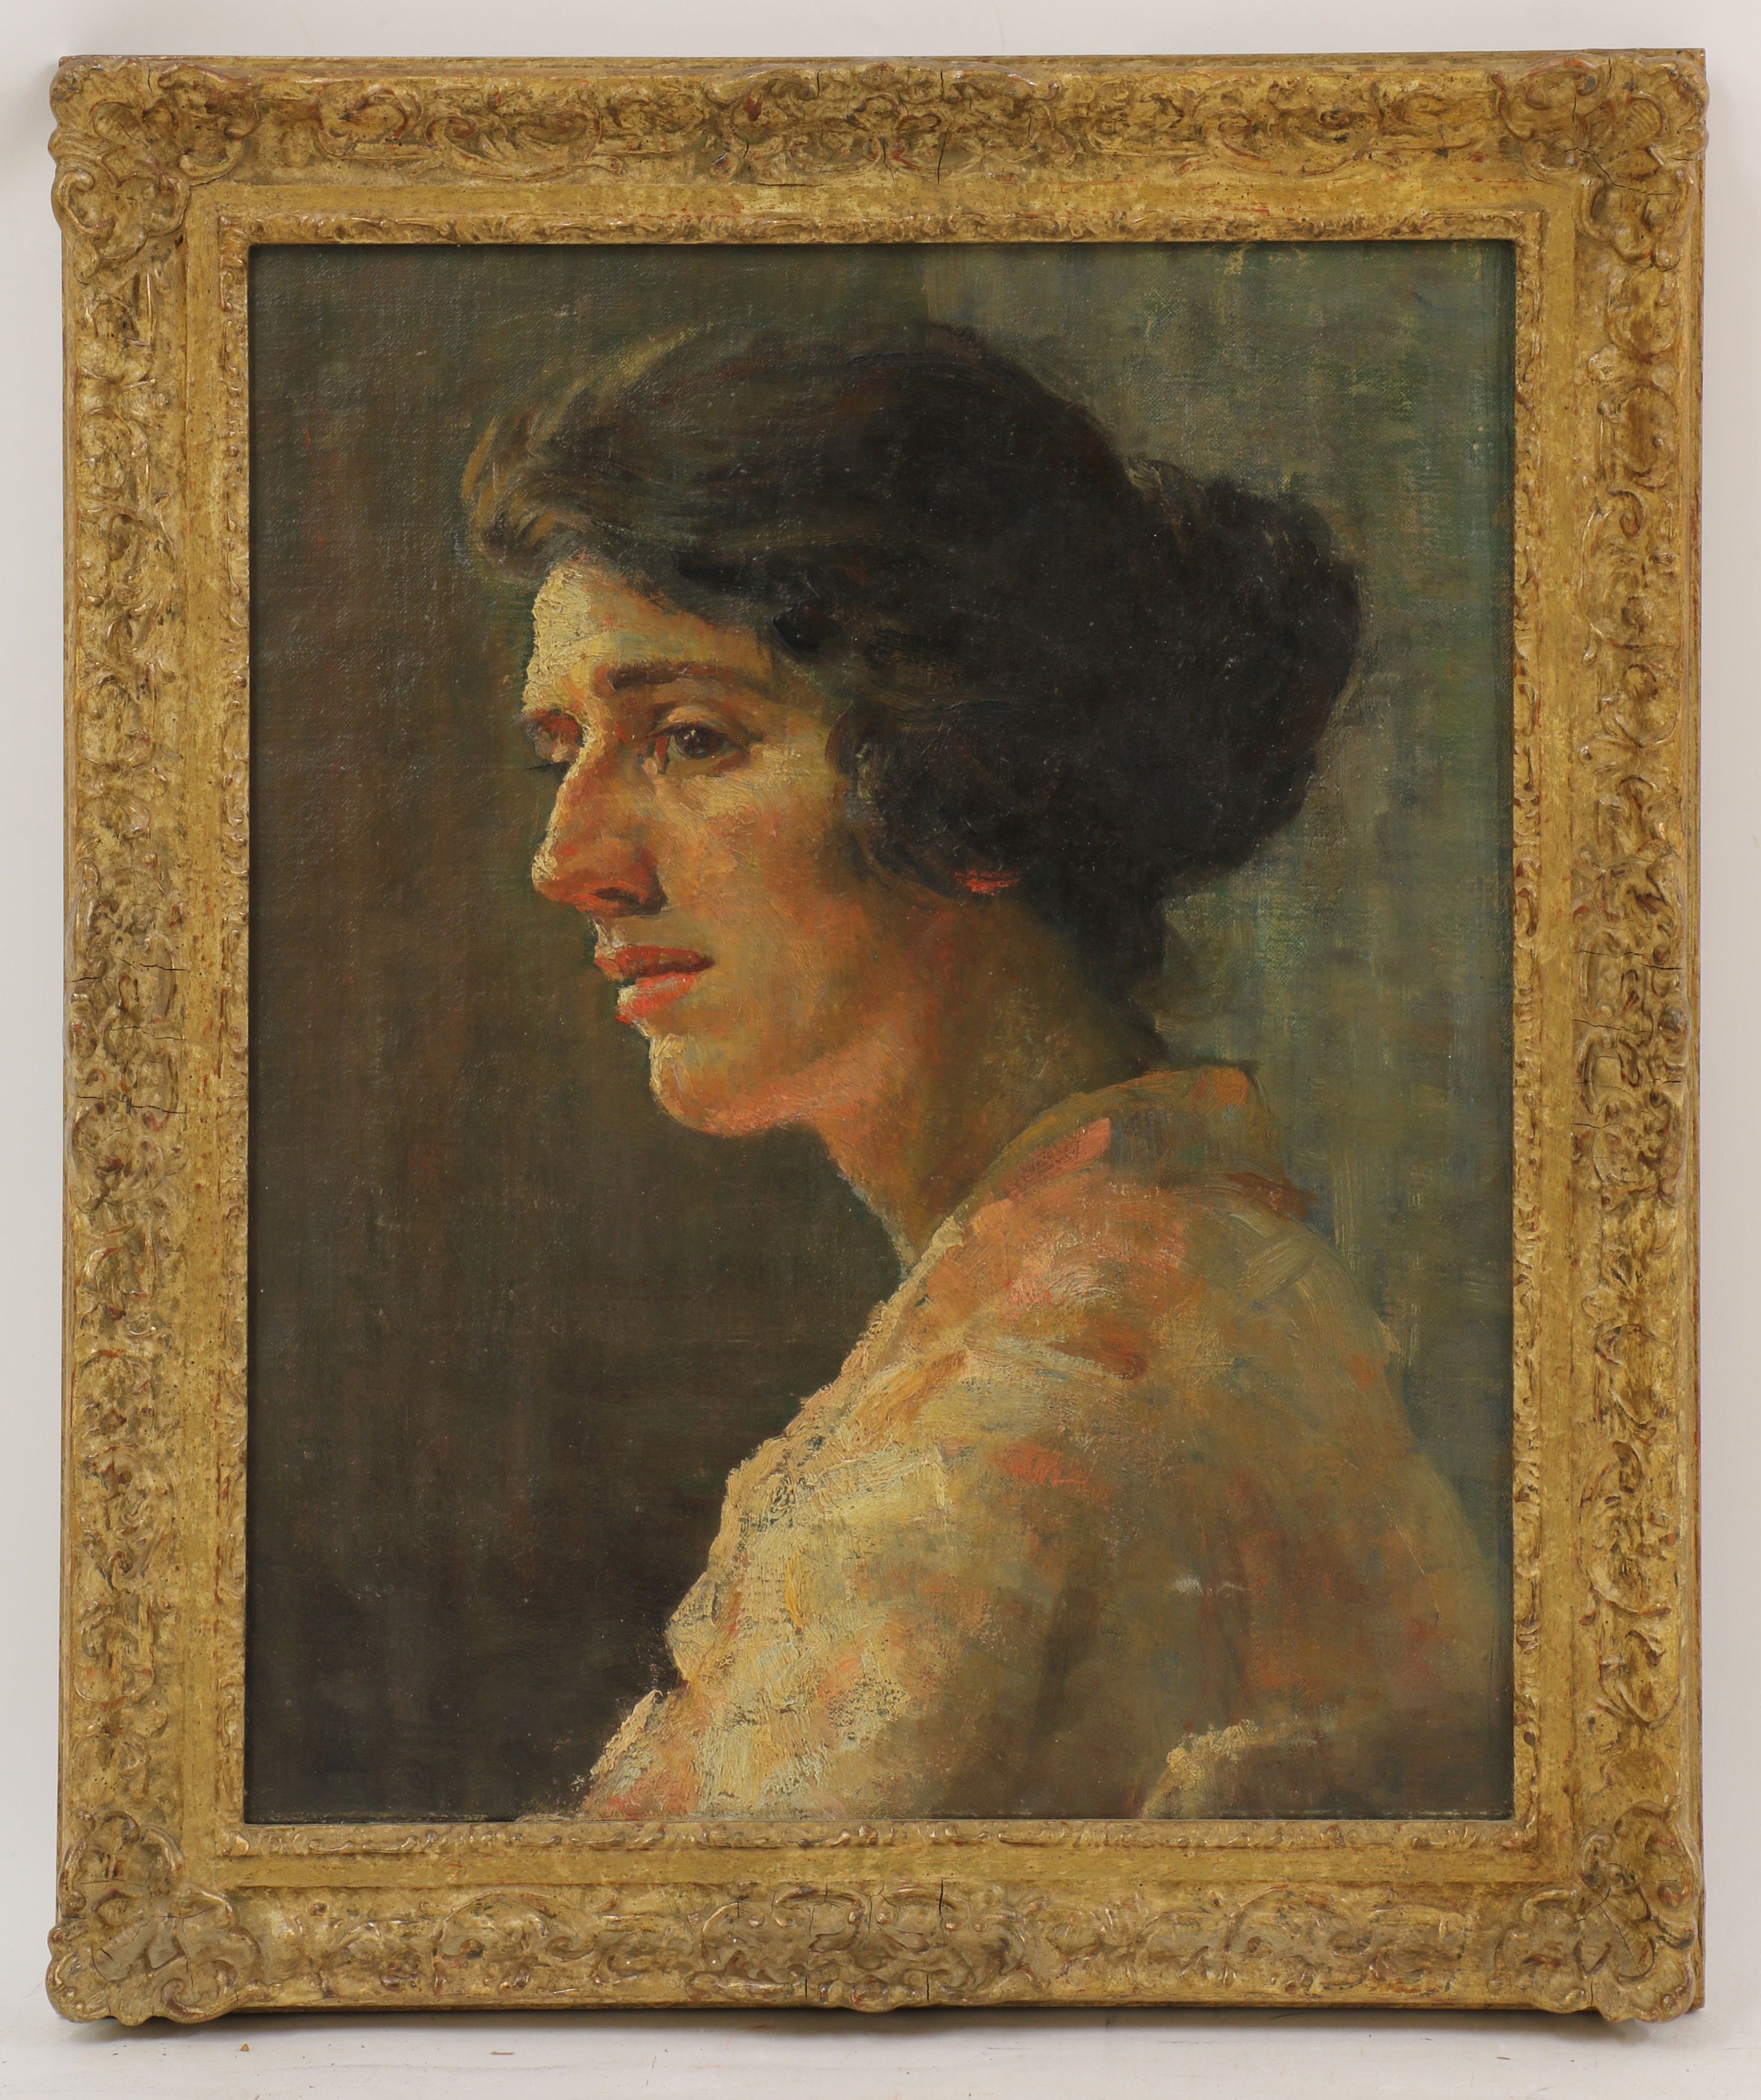 Artwork by Dame Laura Knight, Portrait of a young woman, Made of oil on canvas